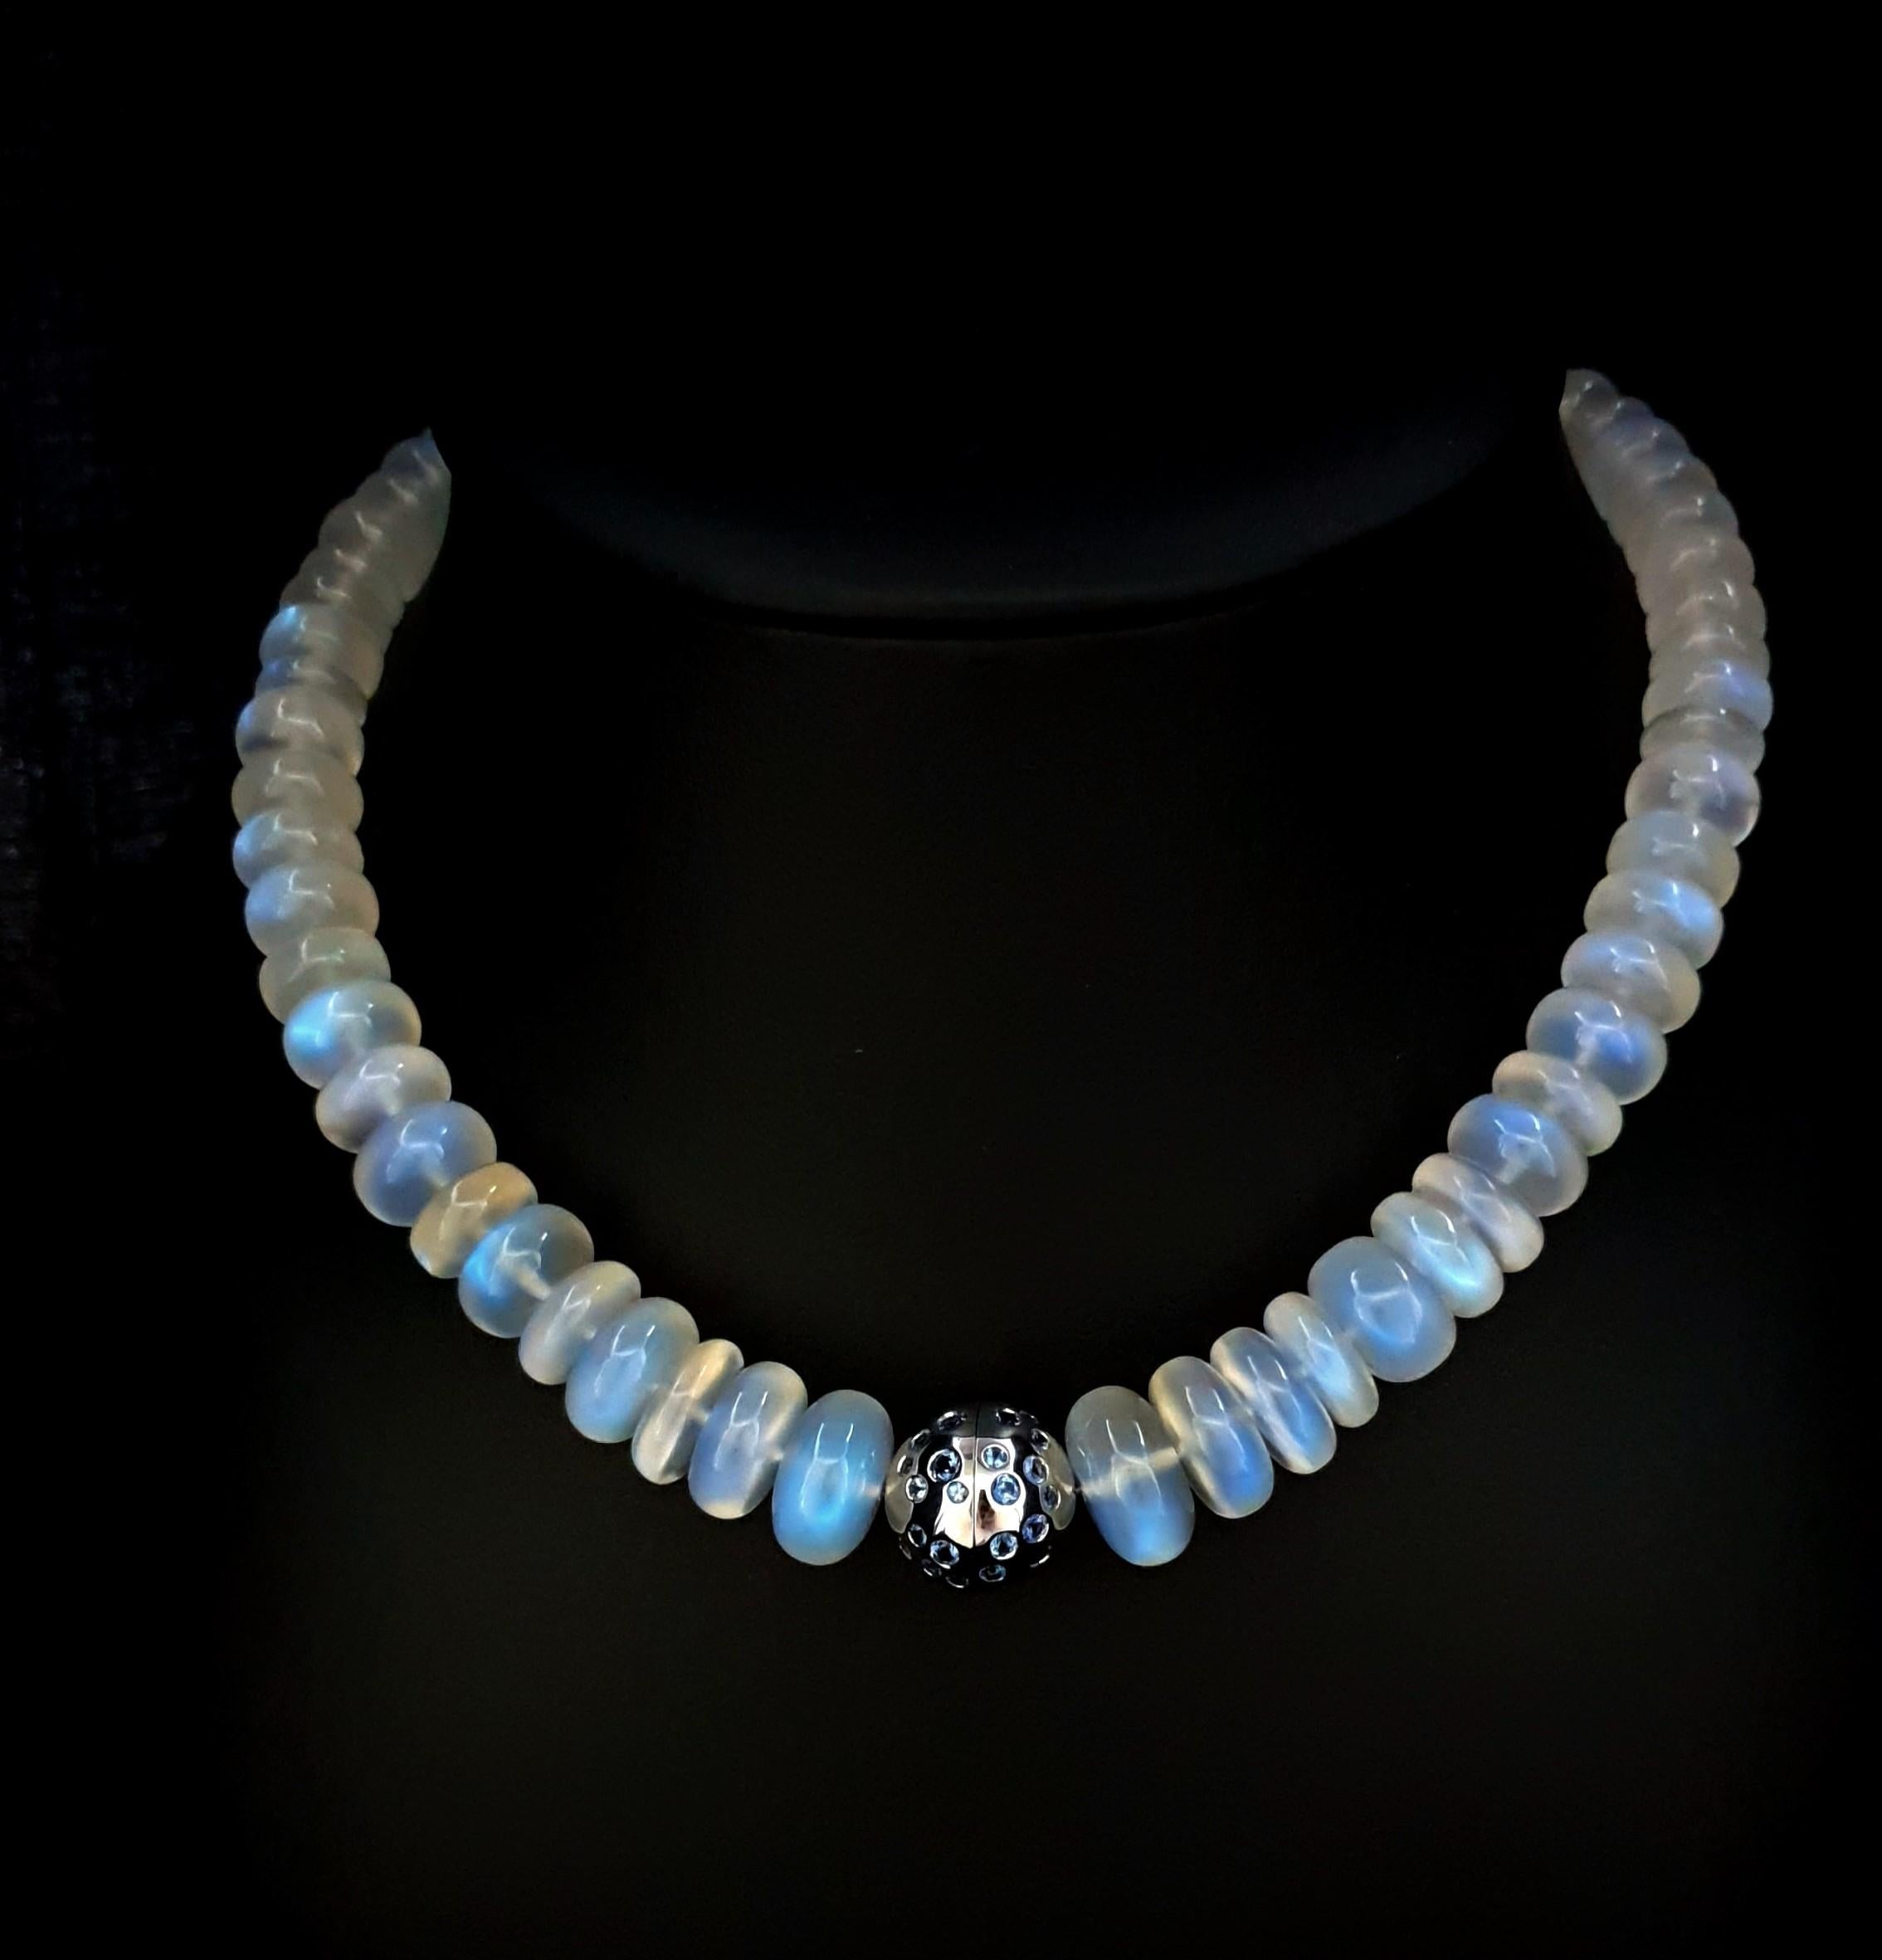 Blue Moonstone Rondel Beaded Necklace with 18 Carat White Gold Sapphire Clasp For Sale 1